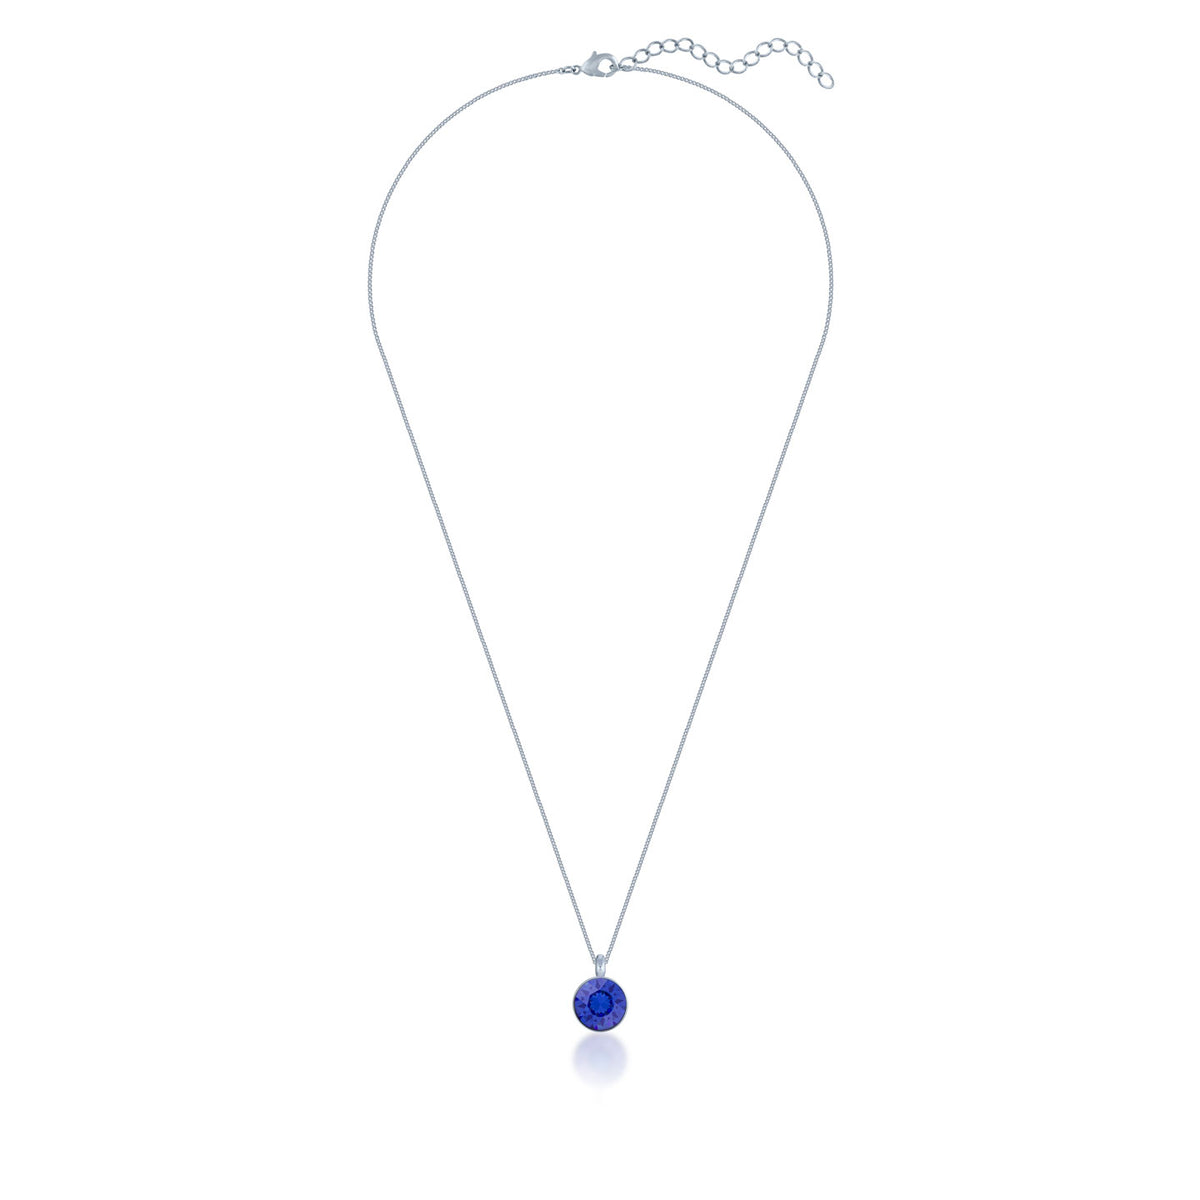 Bella Pendant Necklace with Blue Sapphire Round Crystals from Swarovski Silver Toned Rhodium Plated - Ed Heart